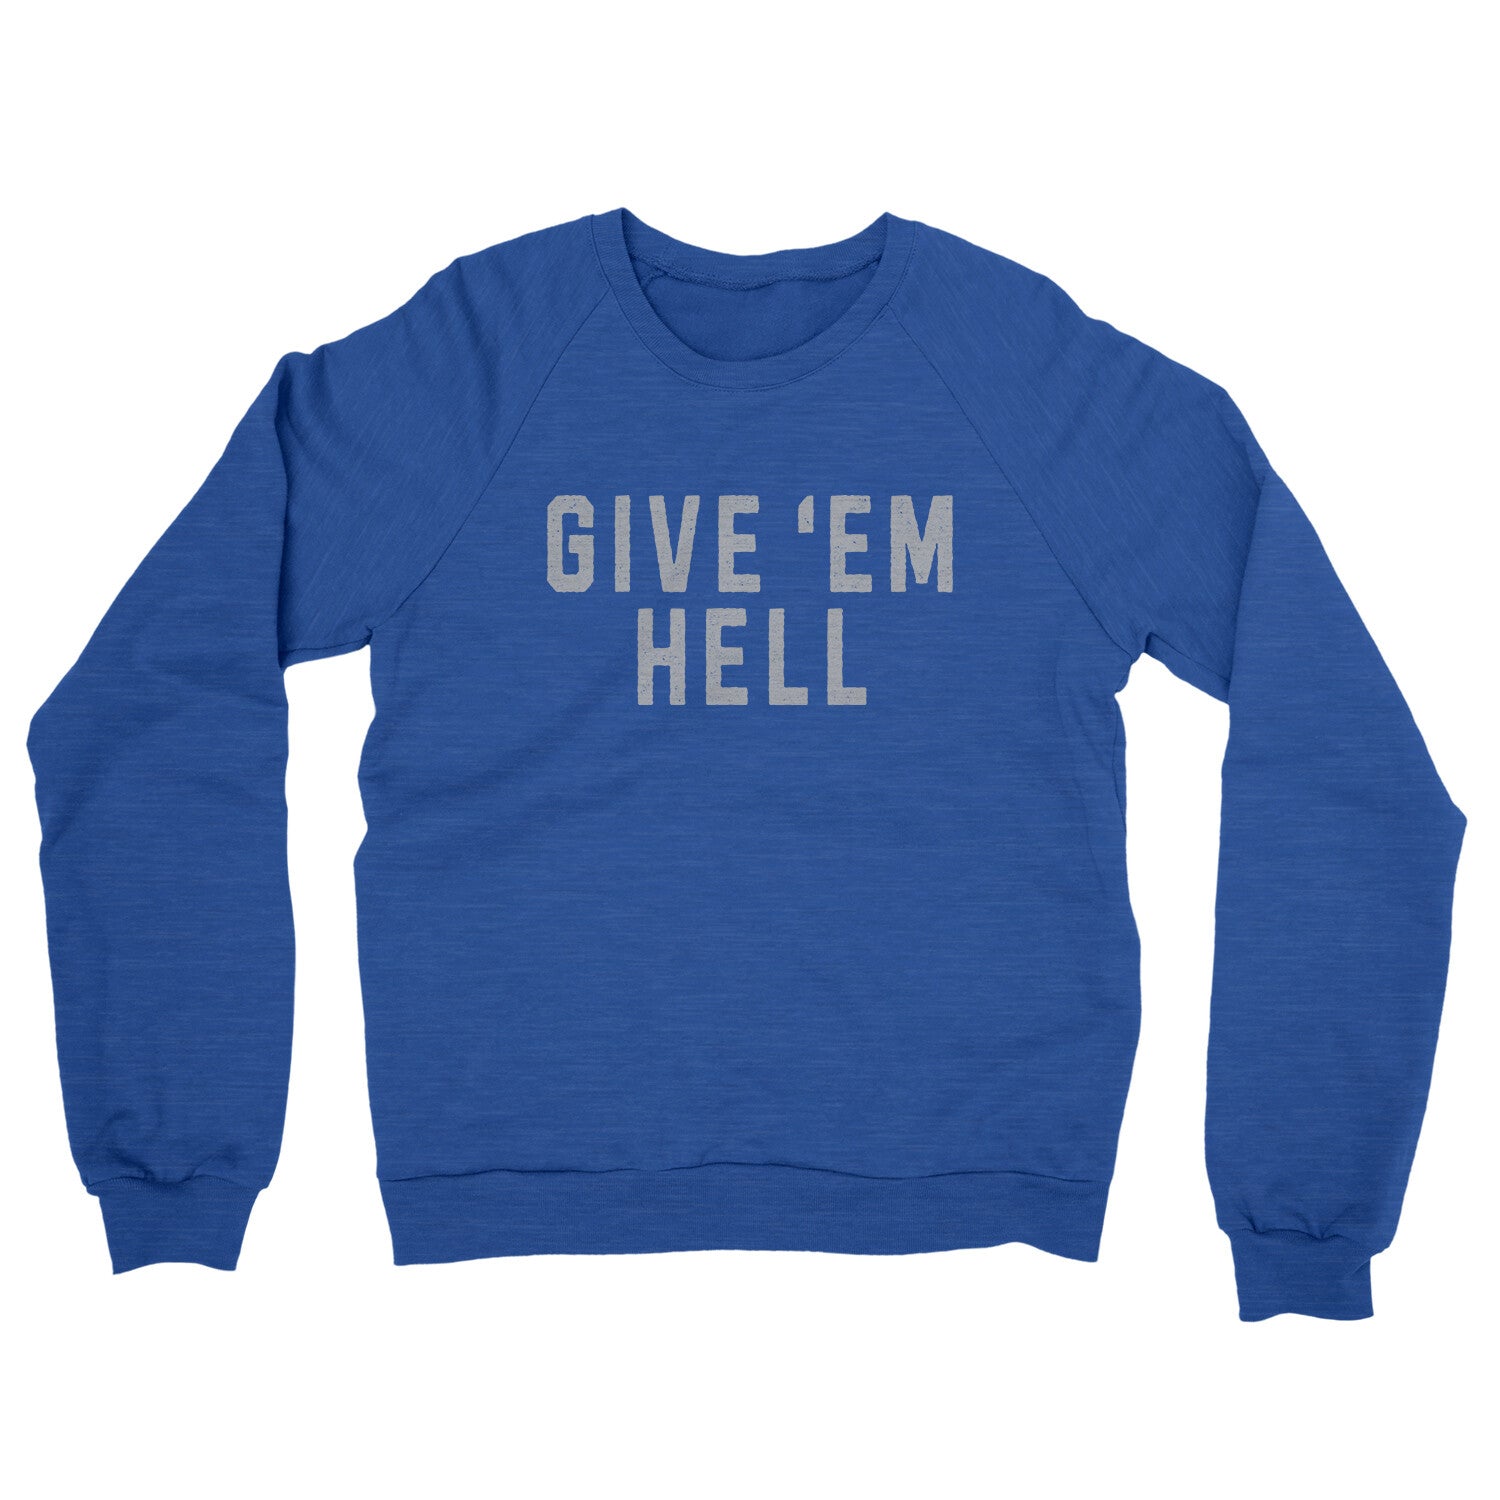 Give ‘em Hell in Heather Royal Color